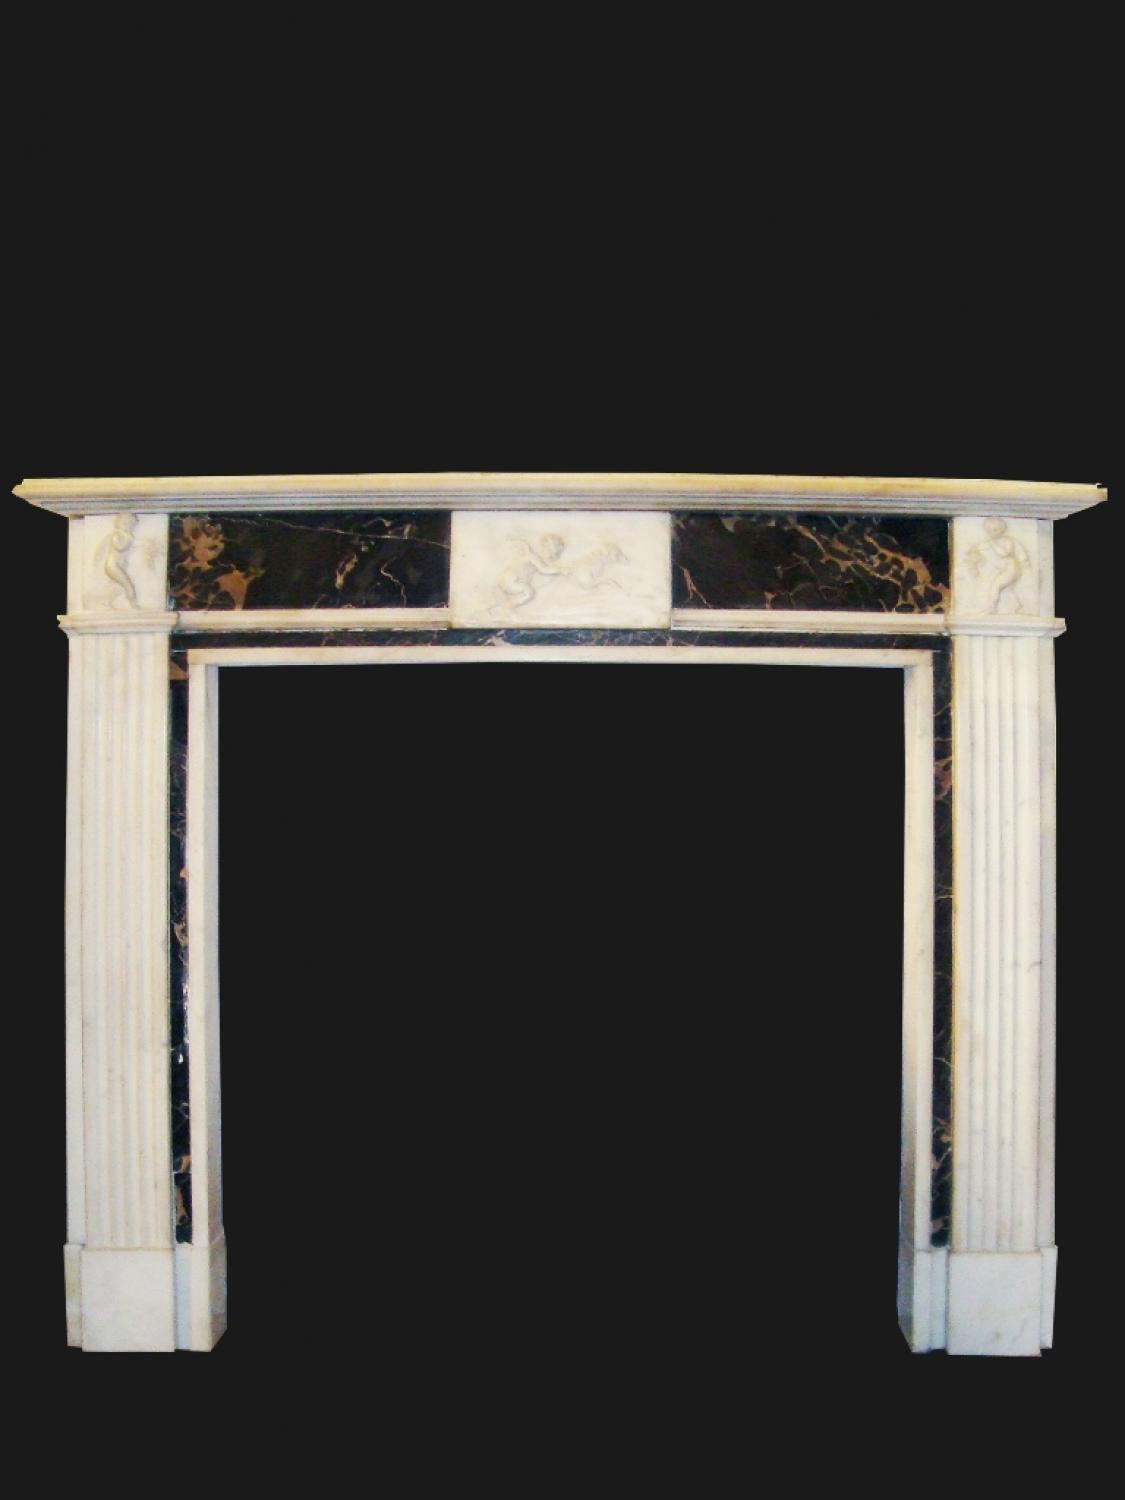 White and black marble fire surround